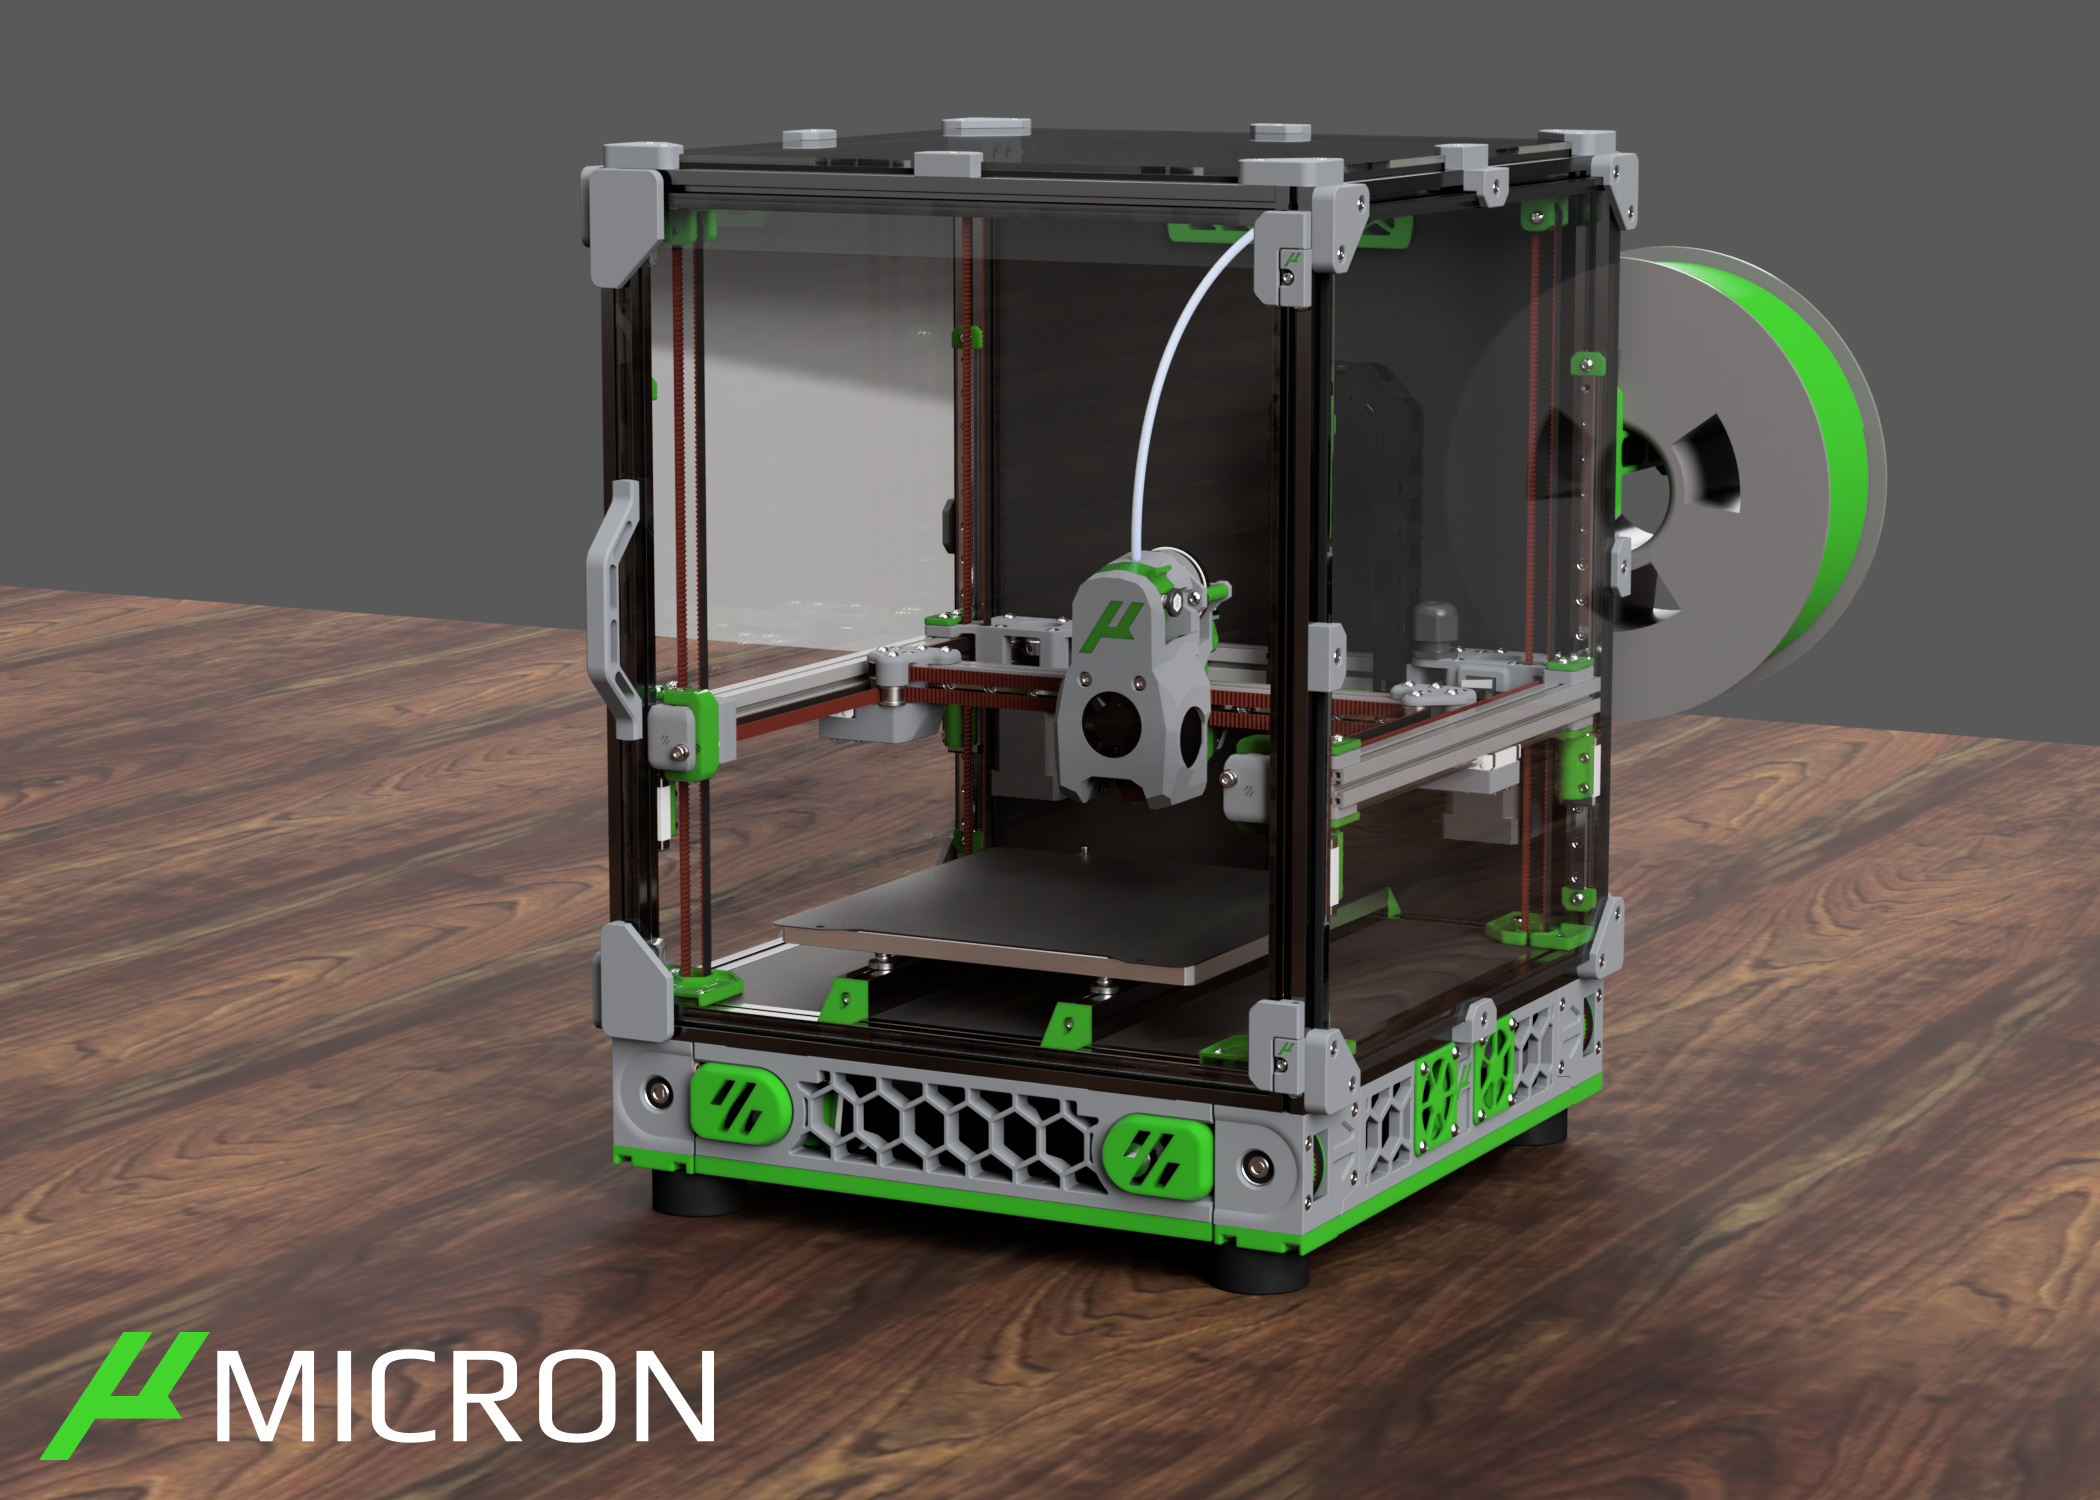 Rendering of a Micron build